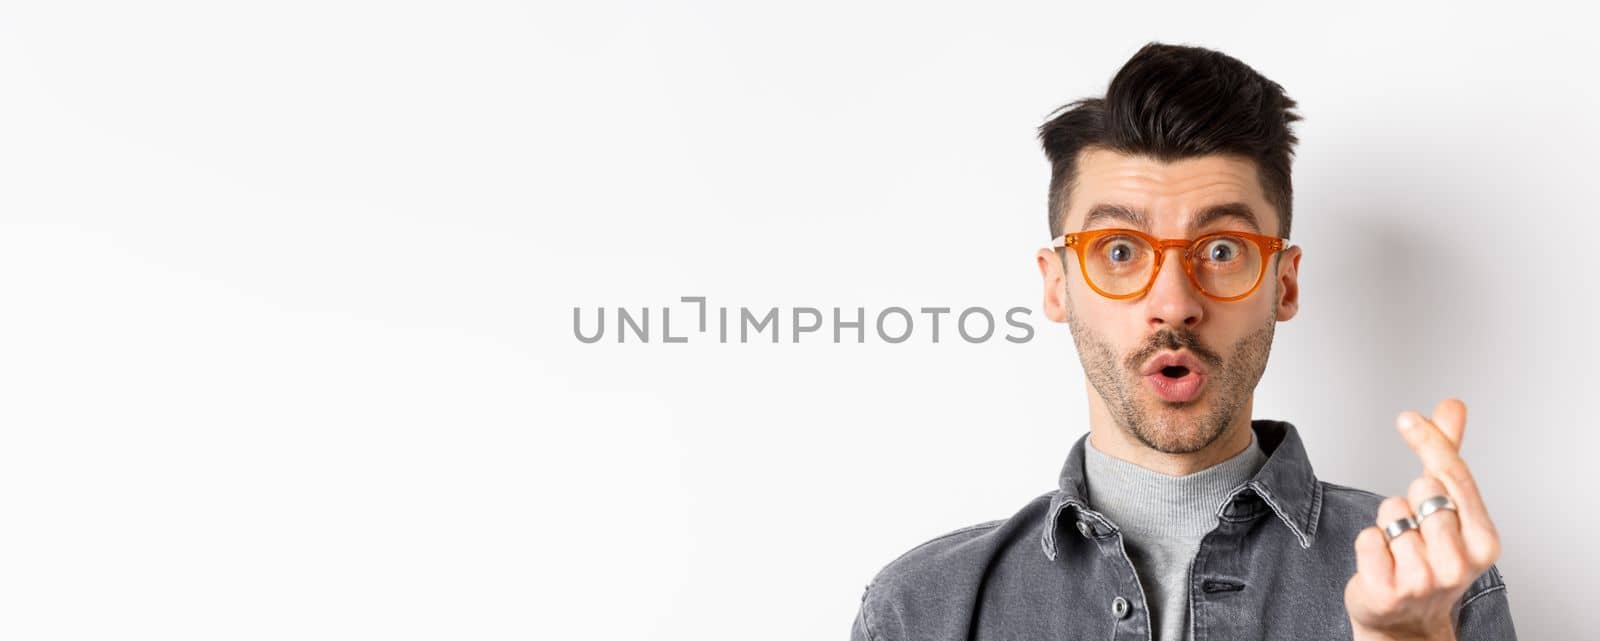 Close up portrait of cute guy with moustache wearing glasses, showing hand heart sign, look impressed at camera, standing on white background.